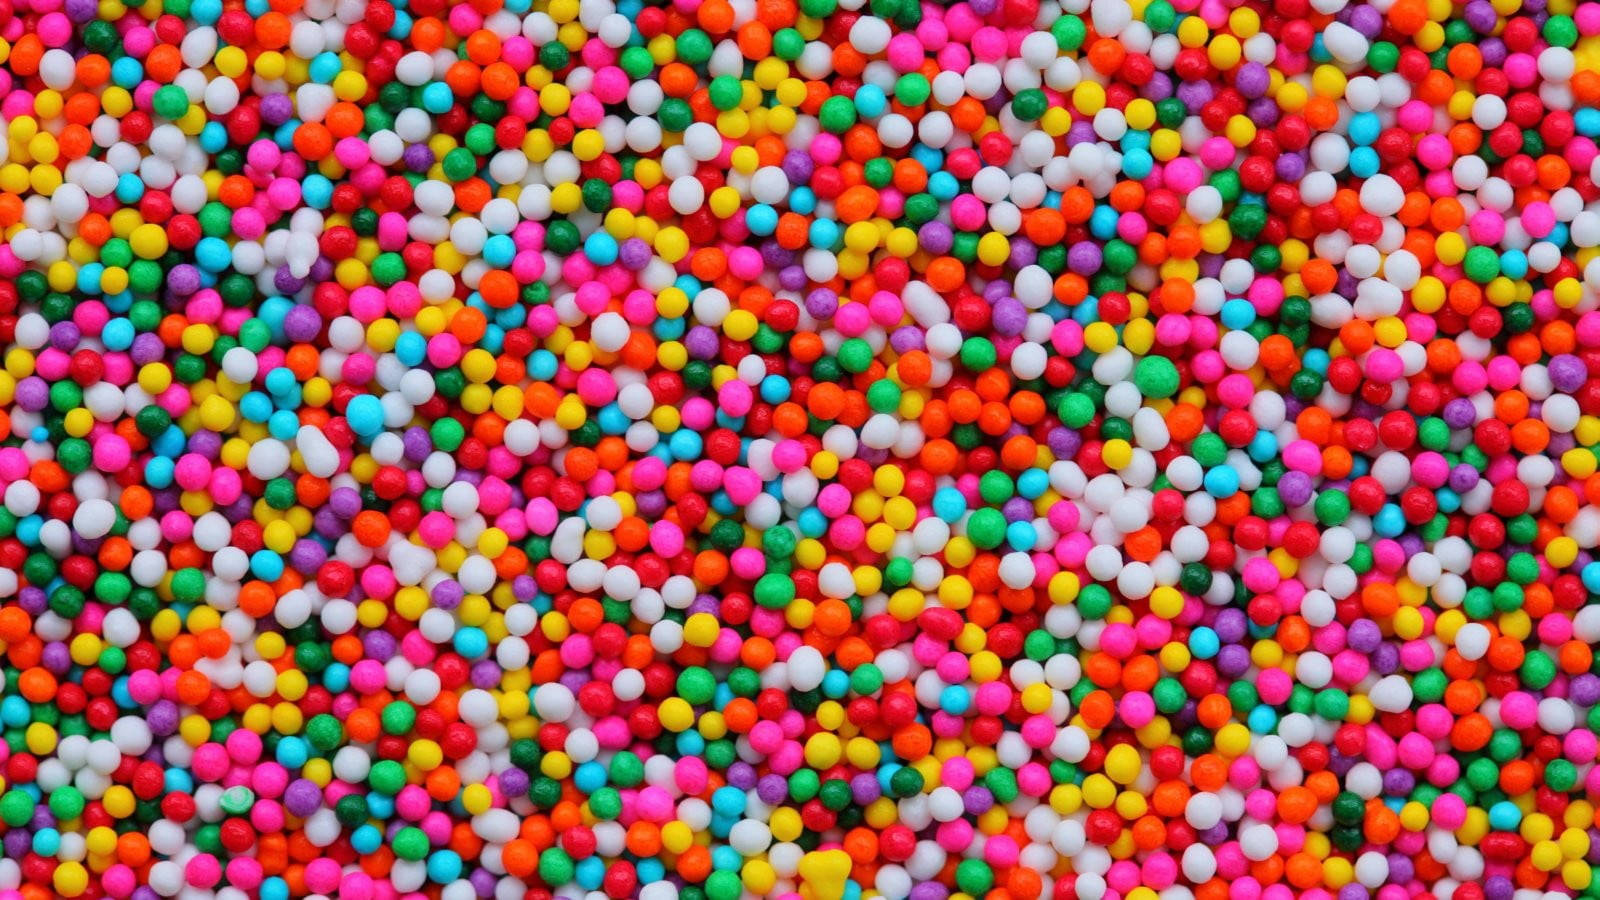 Colorful Candy Balls Background